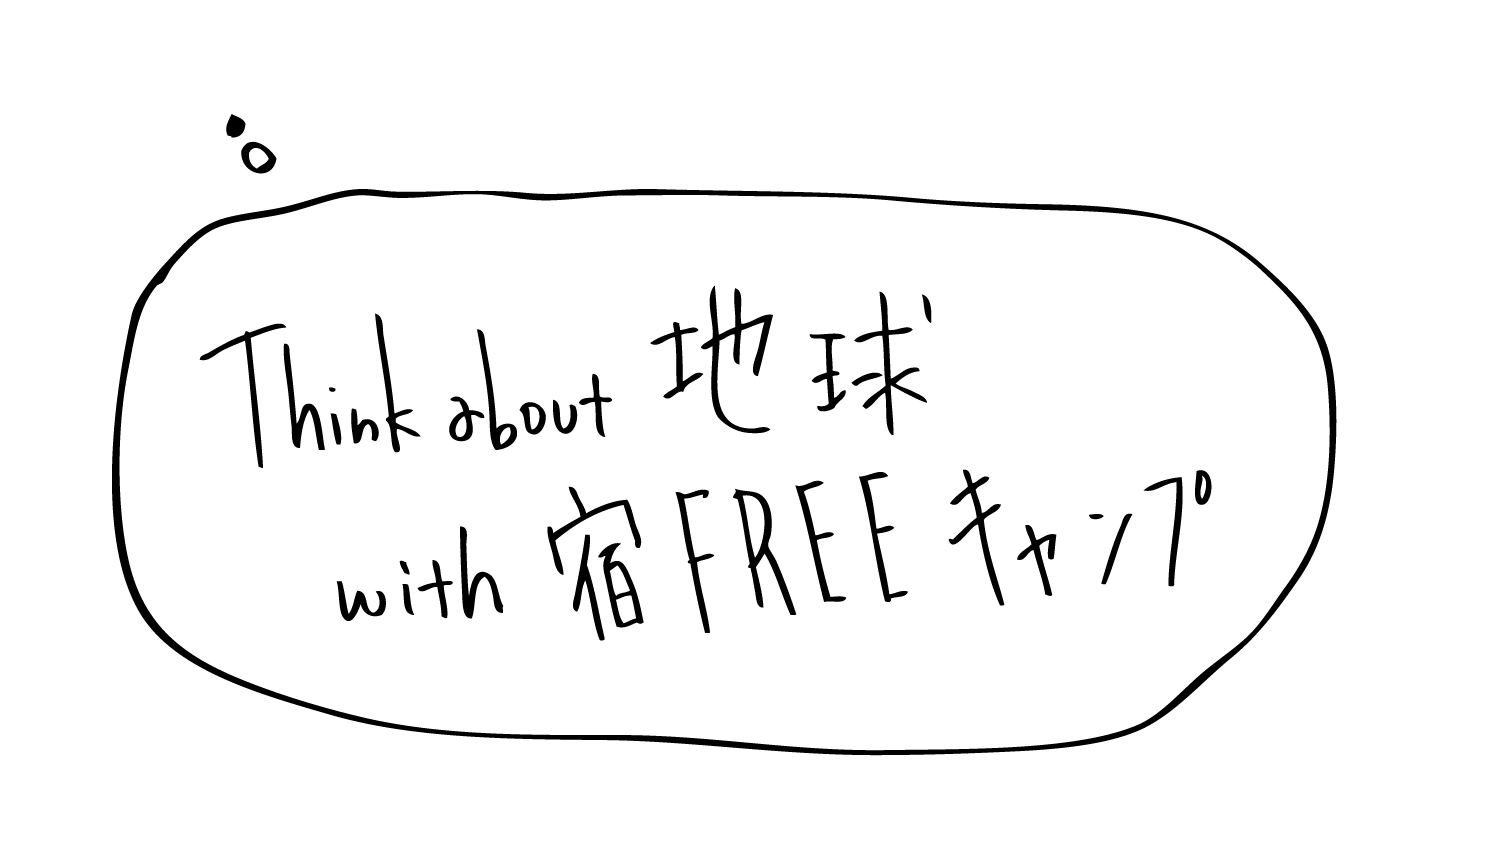 Think about 地球 with 宿FREEキャンプ